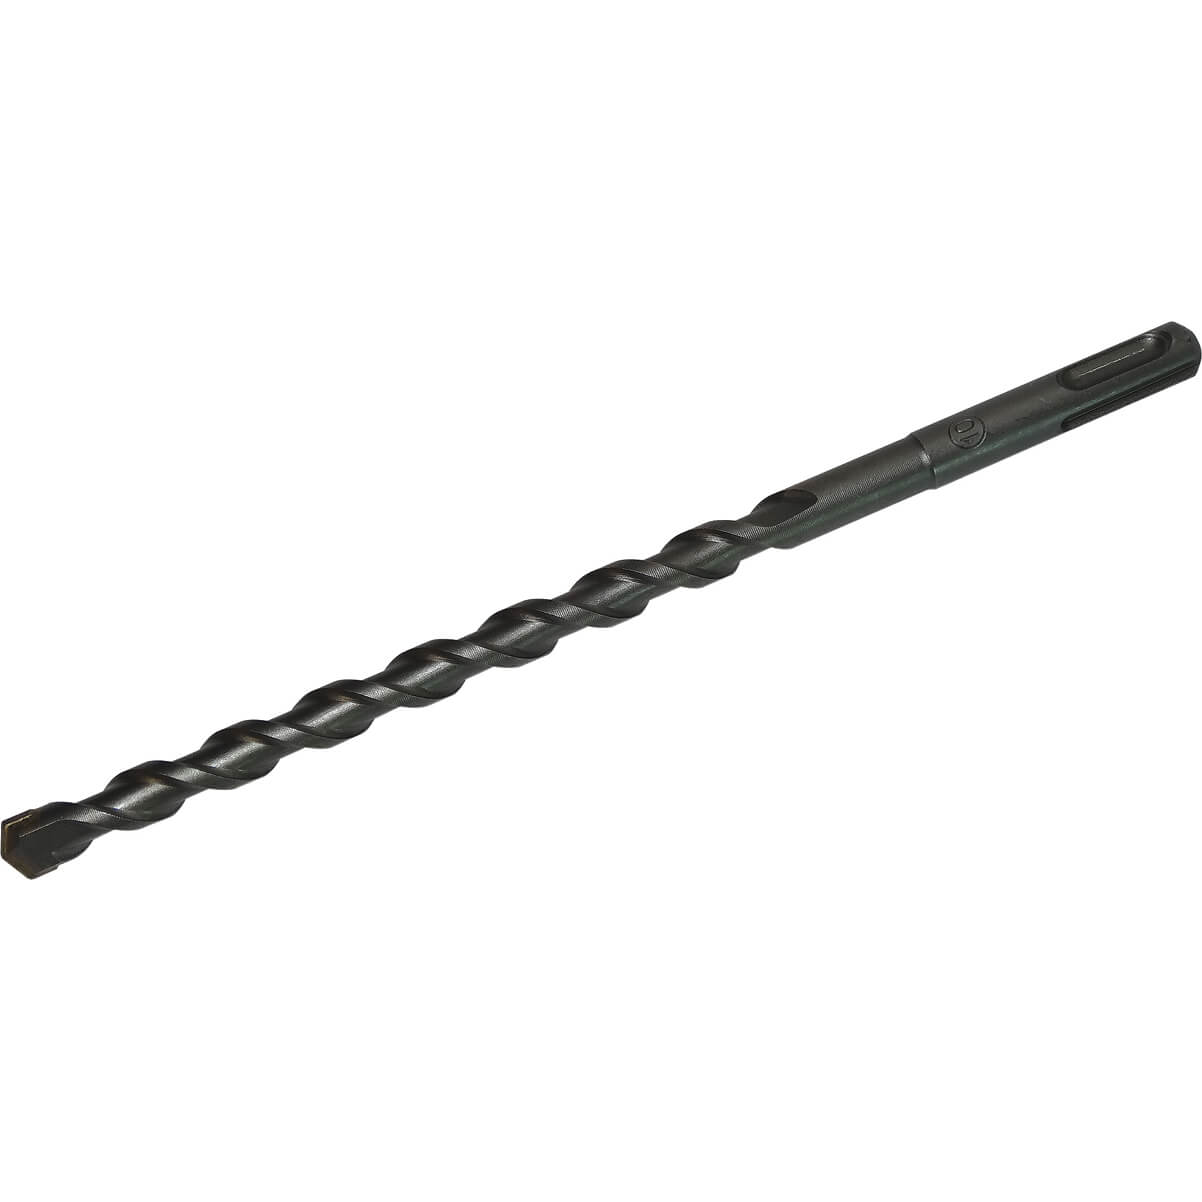 Image of CK SDS Plus Masonry Drill Bit 7mm 160mm Pack of 1